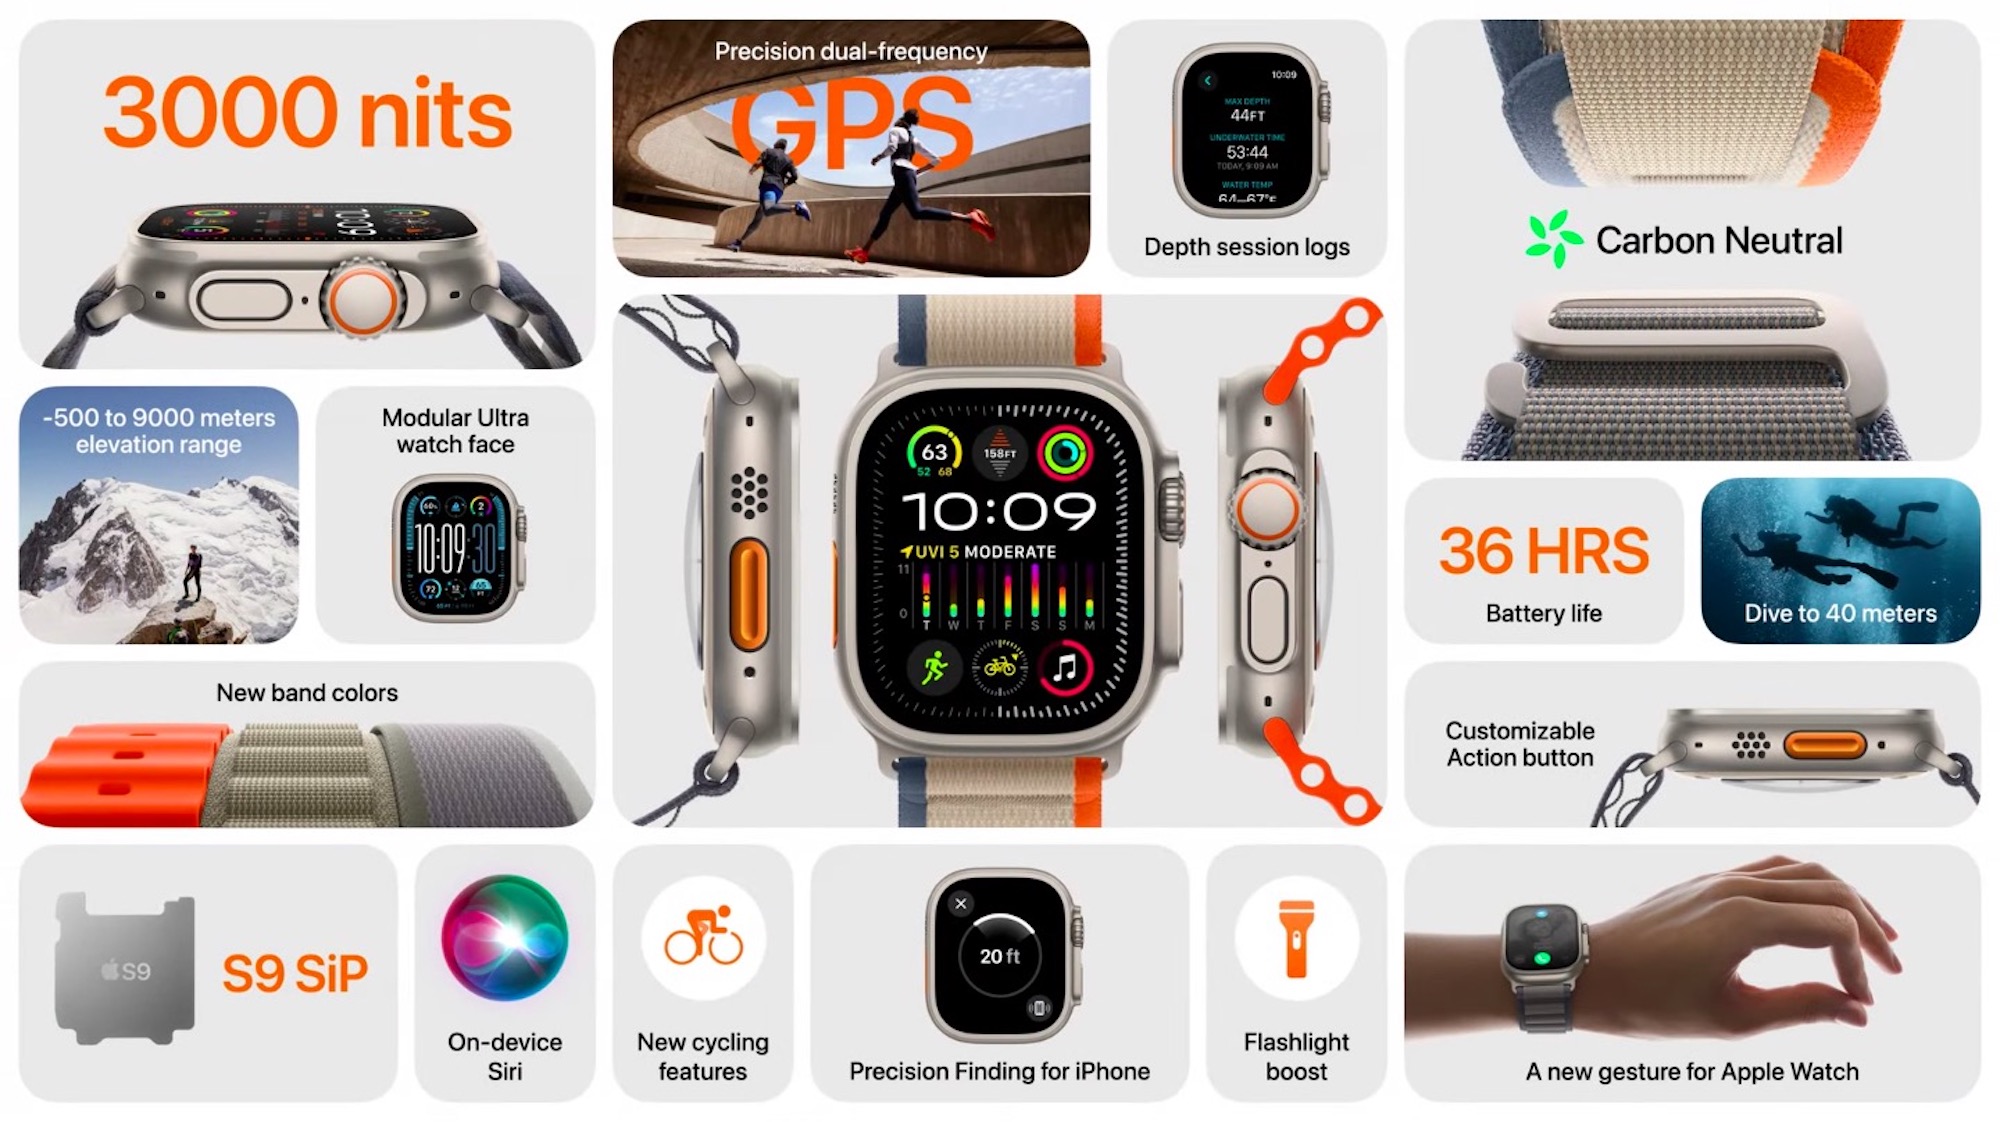 Key features of the Apple Watch Ultra 2.